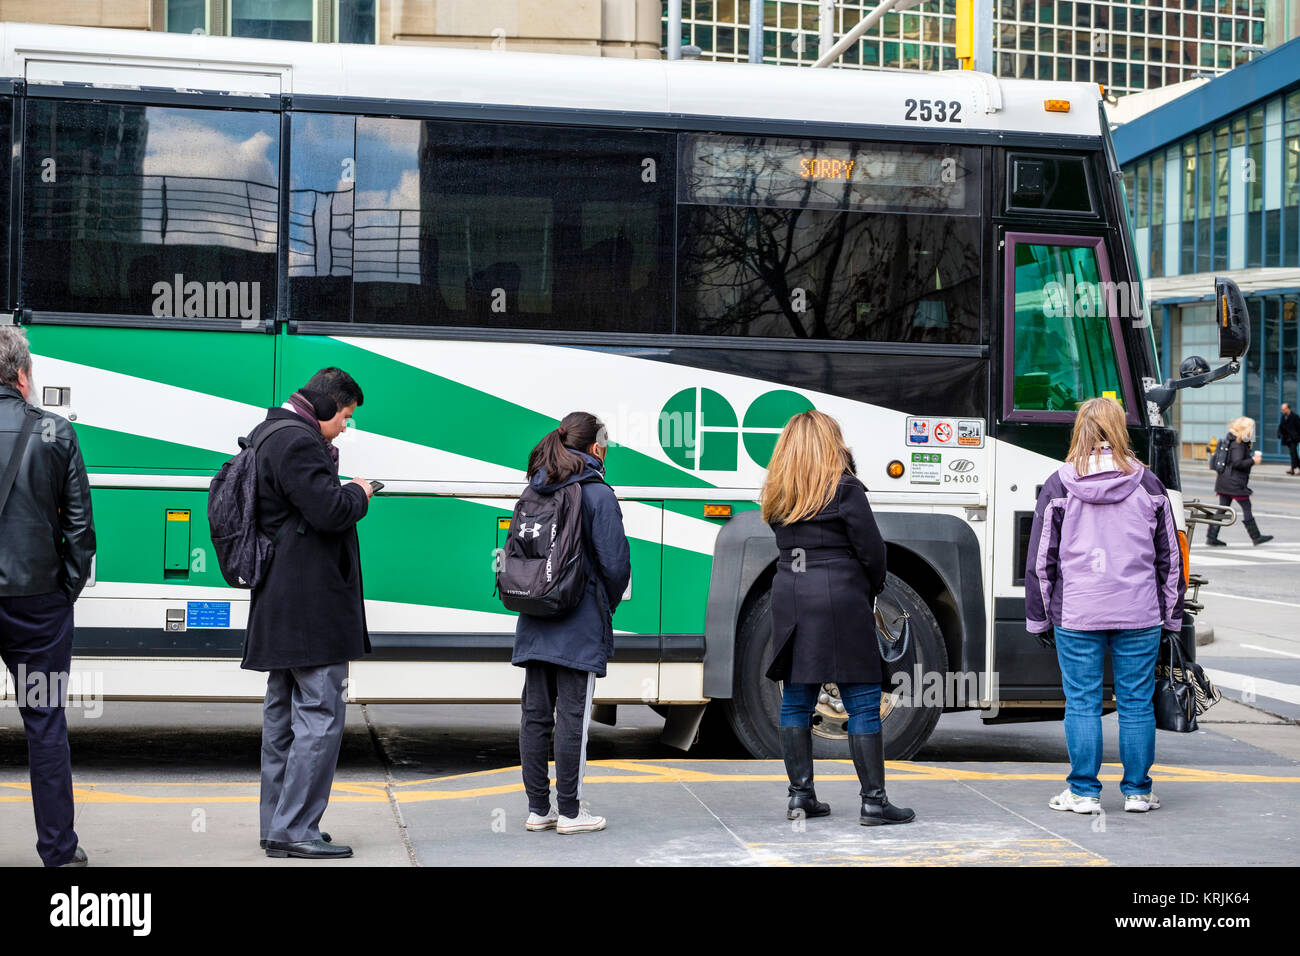 Union Station Bus Terminal, commuters lined up to board a Go bus used for public transportation of people living in the GTA region, Toronto, Ontario, Stock Photo